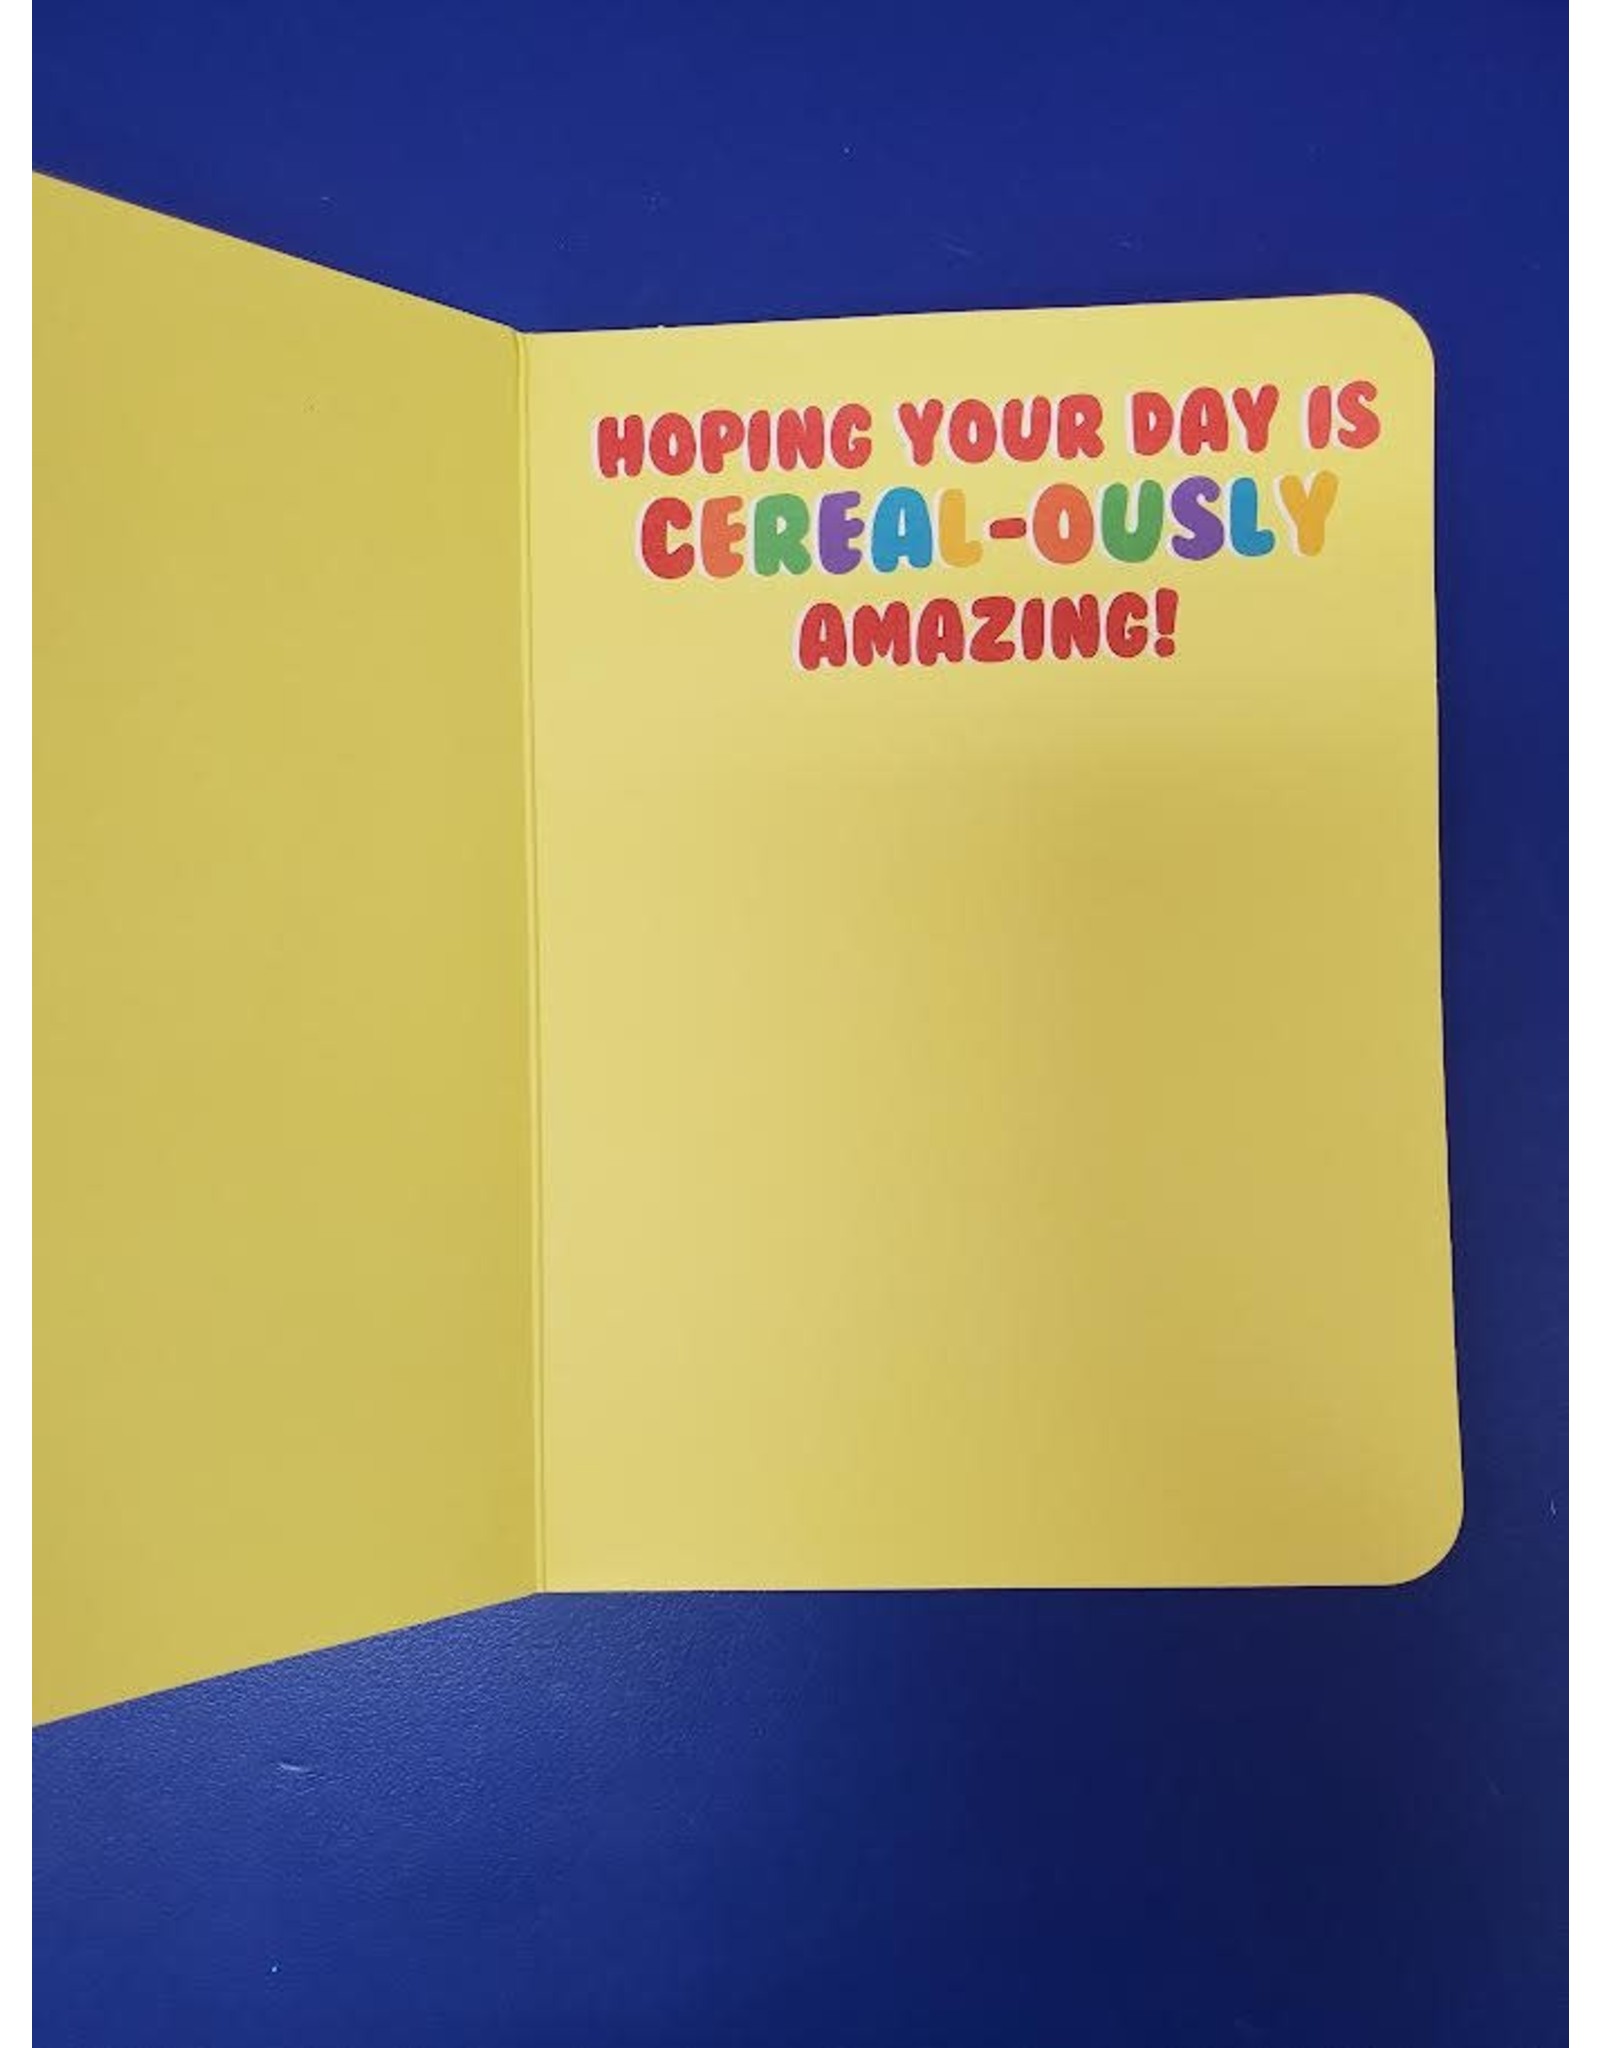 Fruity Cereal Scratch & Sniff Birthday Card